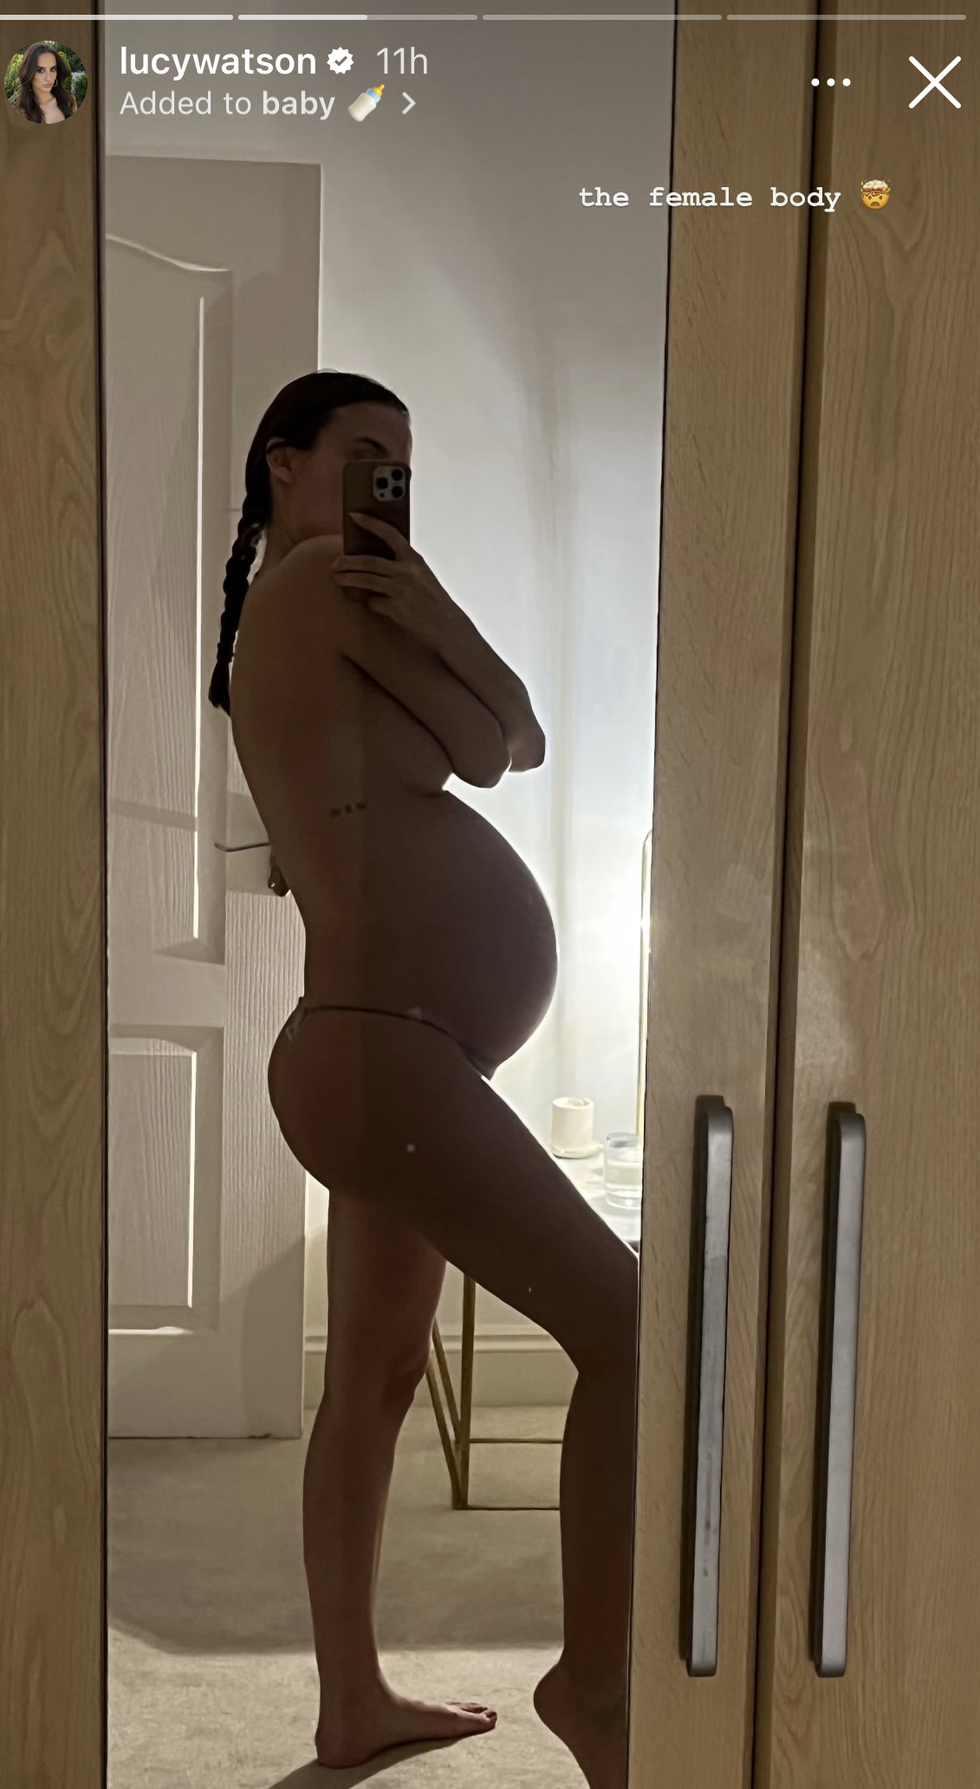 lucy takes mirror selfie from the side, with her baby bump visible